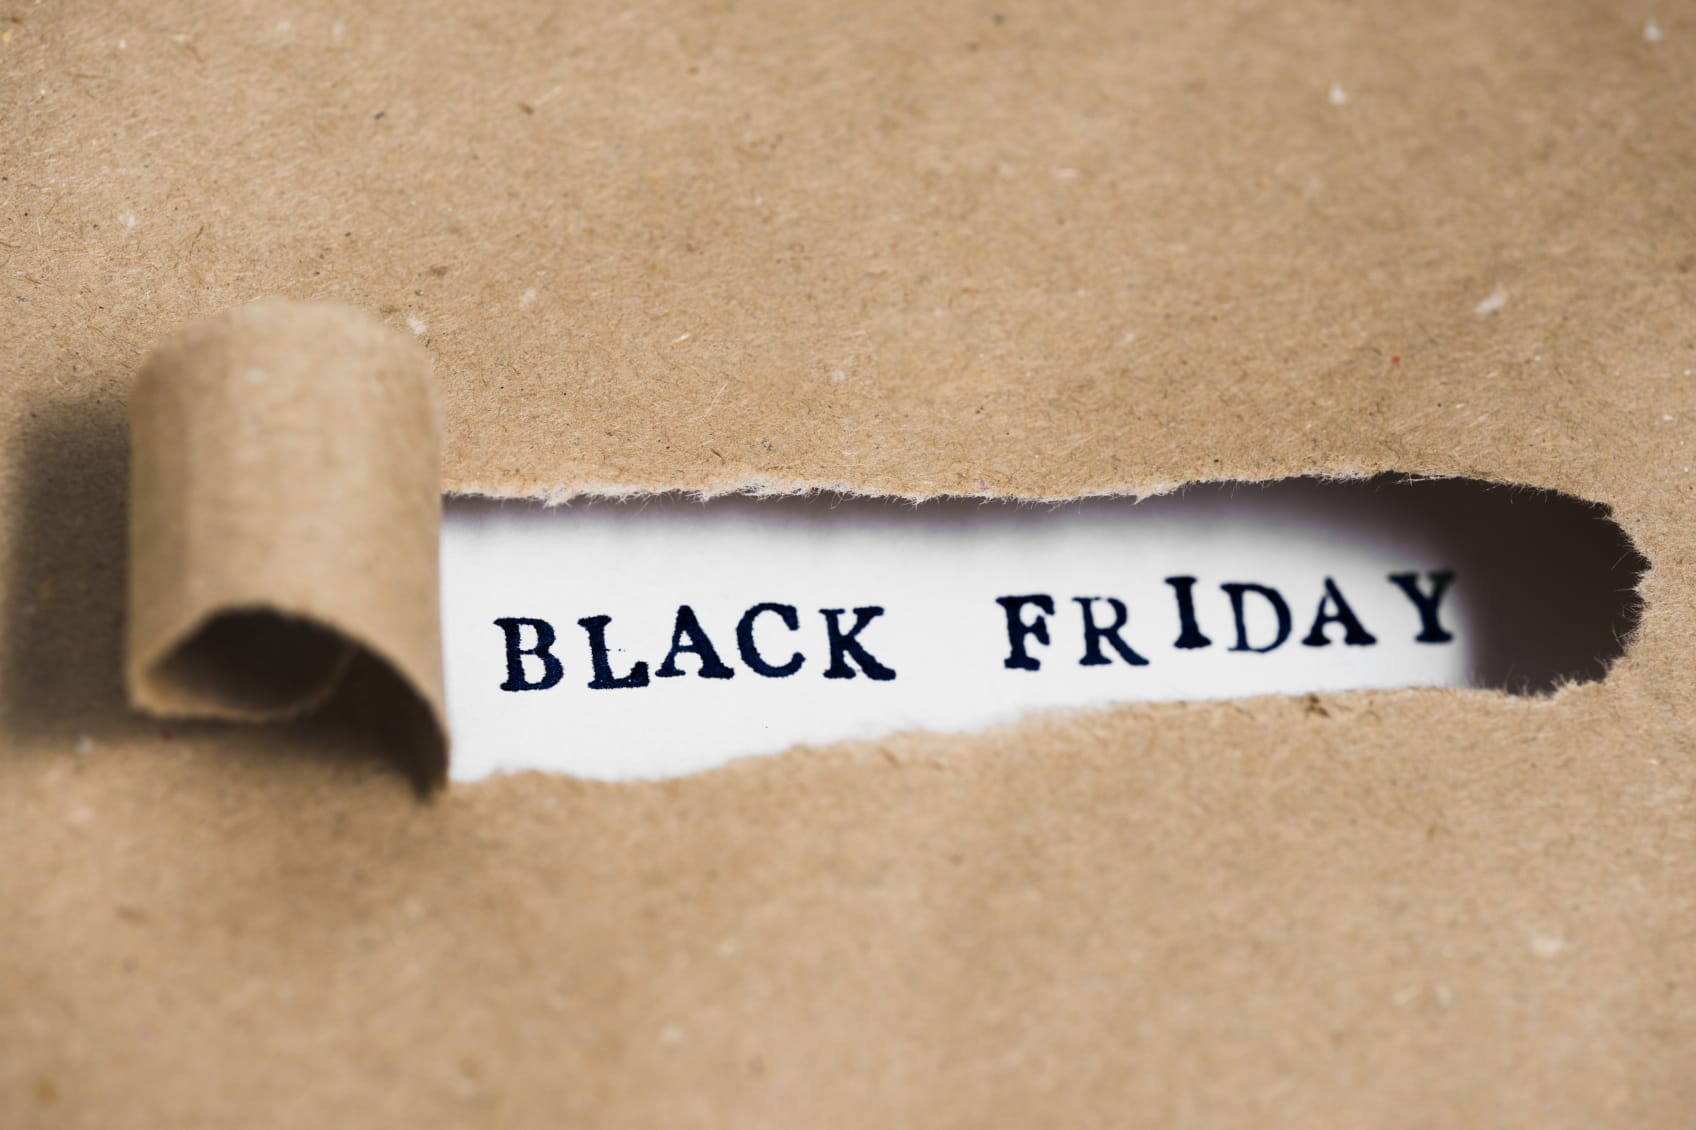 Black Friday typed on paper as seen through a torn paper bag